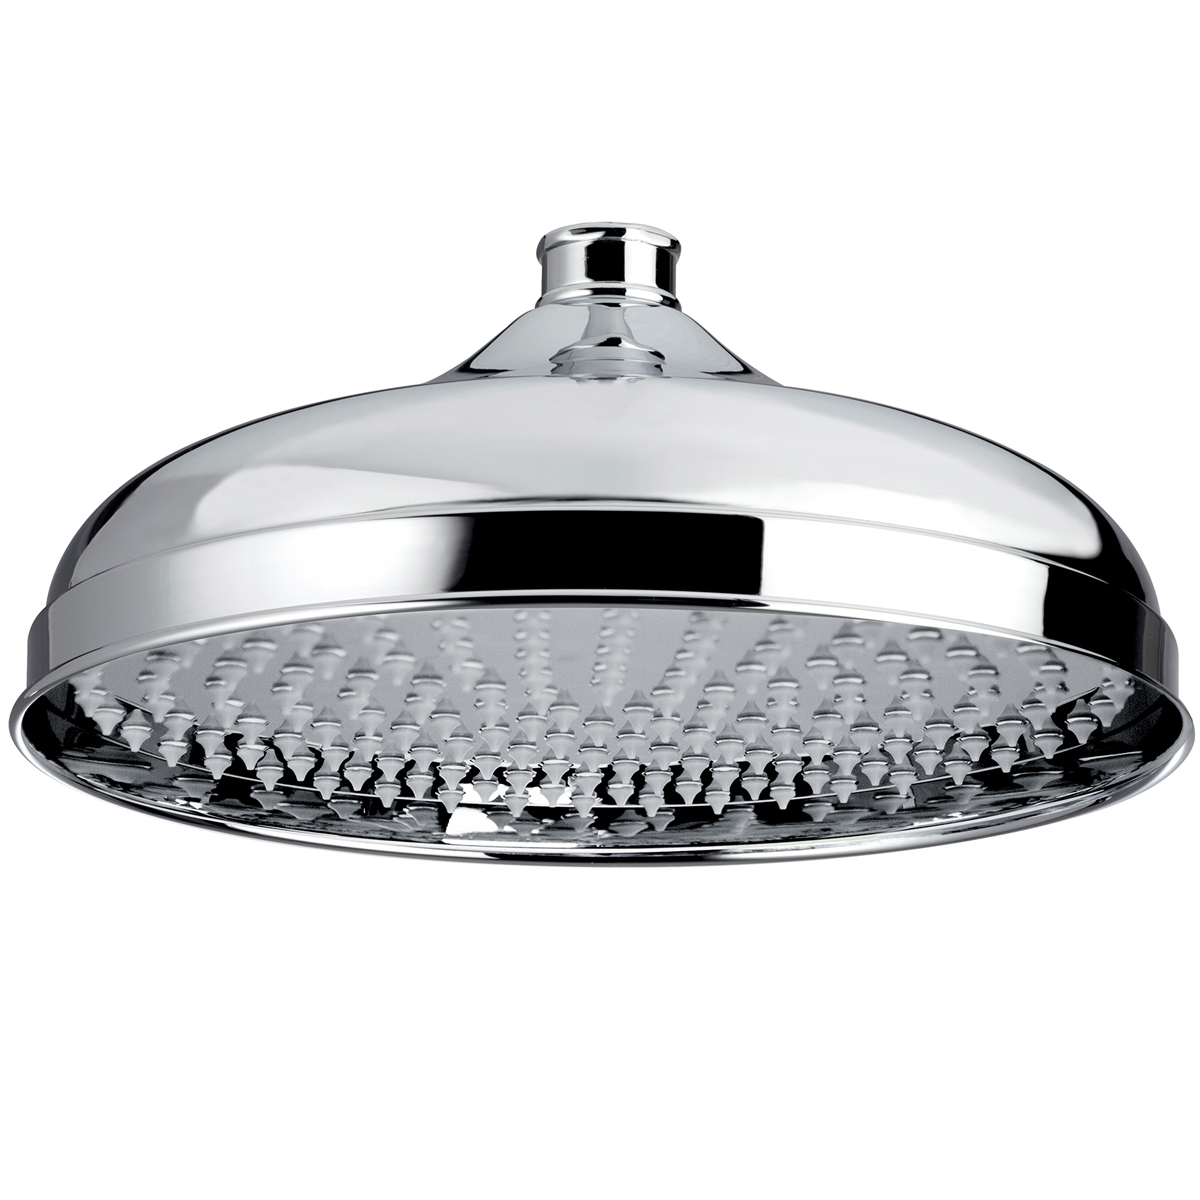 Bristan Traditional Round Fixed Shower Head 300mm Diameter - Chrome - FH TDRD03 C 